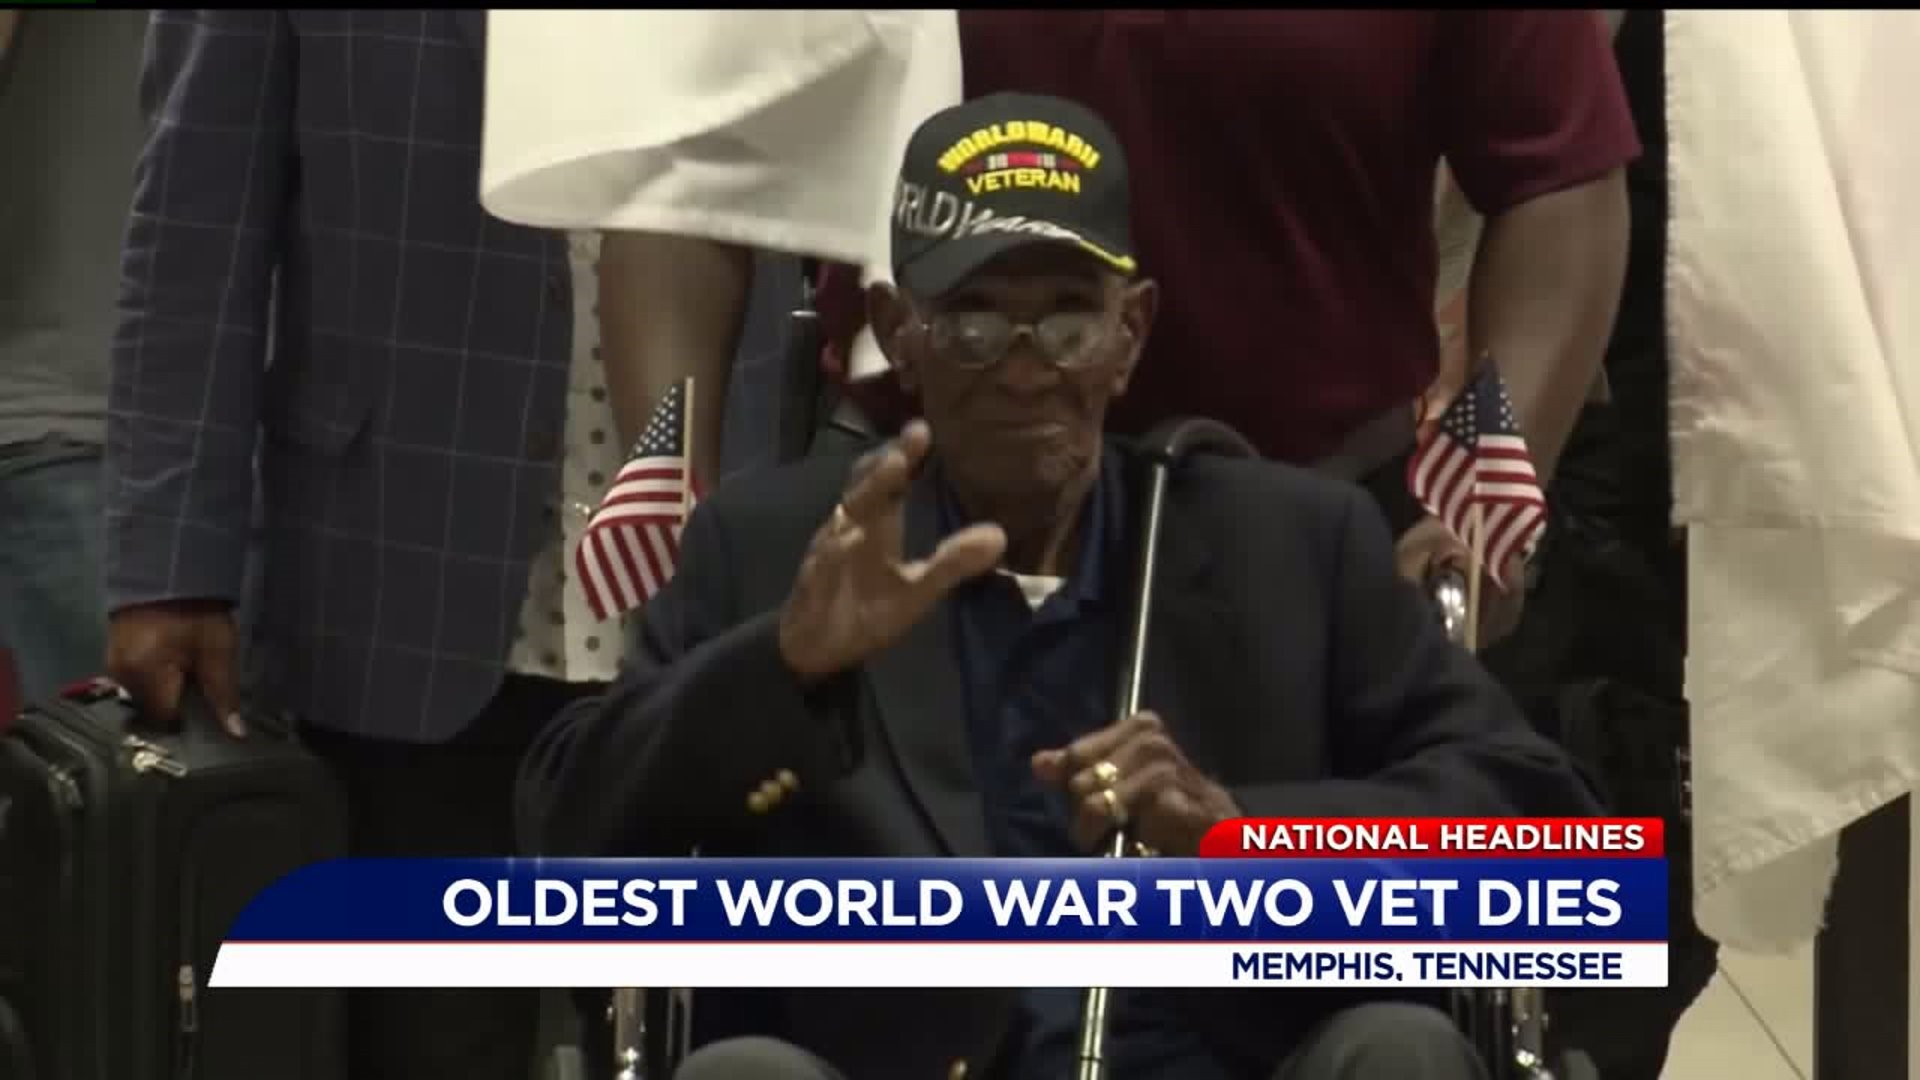 America`s oldest World War II veteran and the oldest man in the US, dies at 112